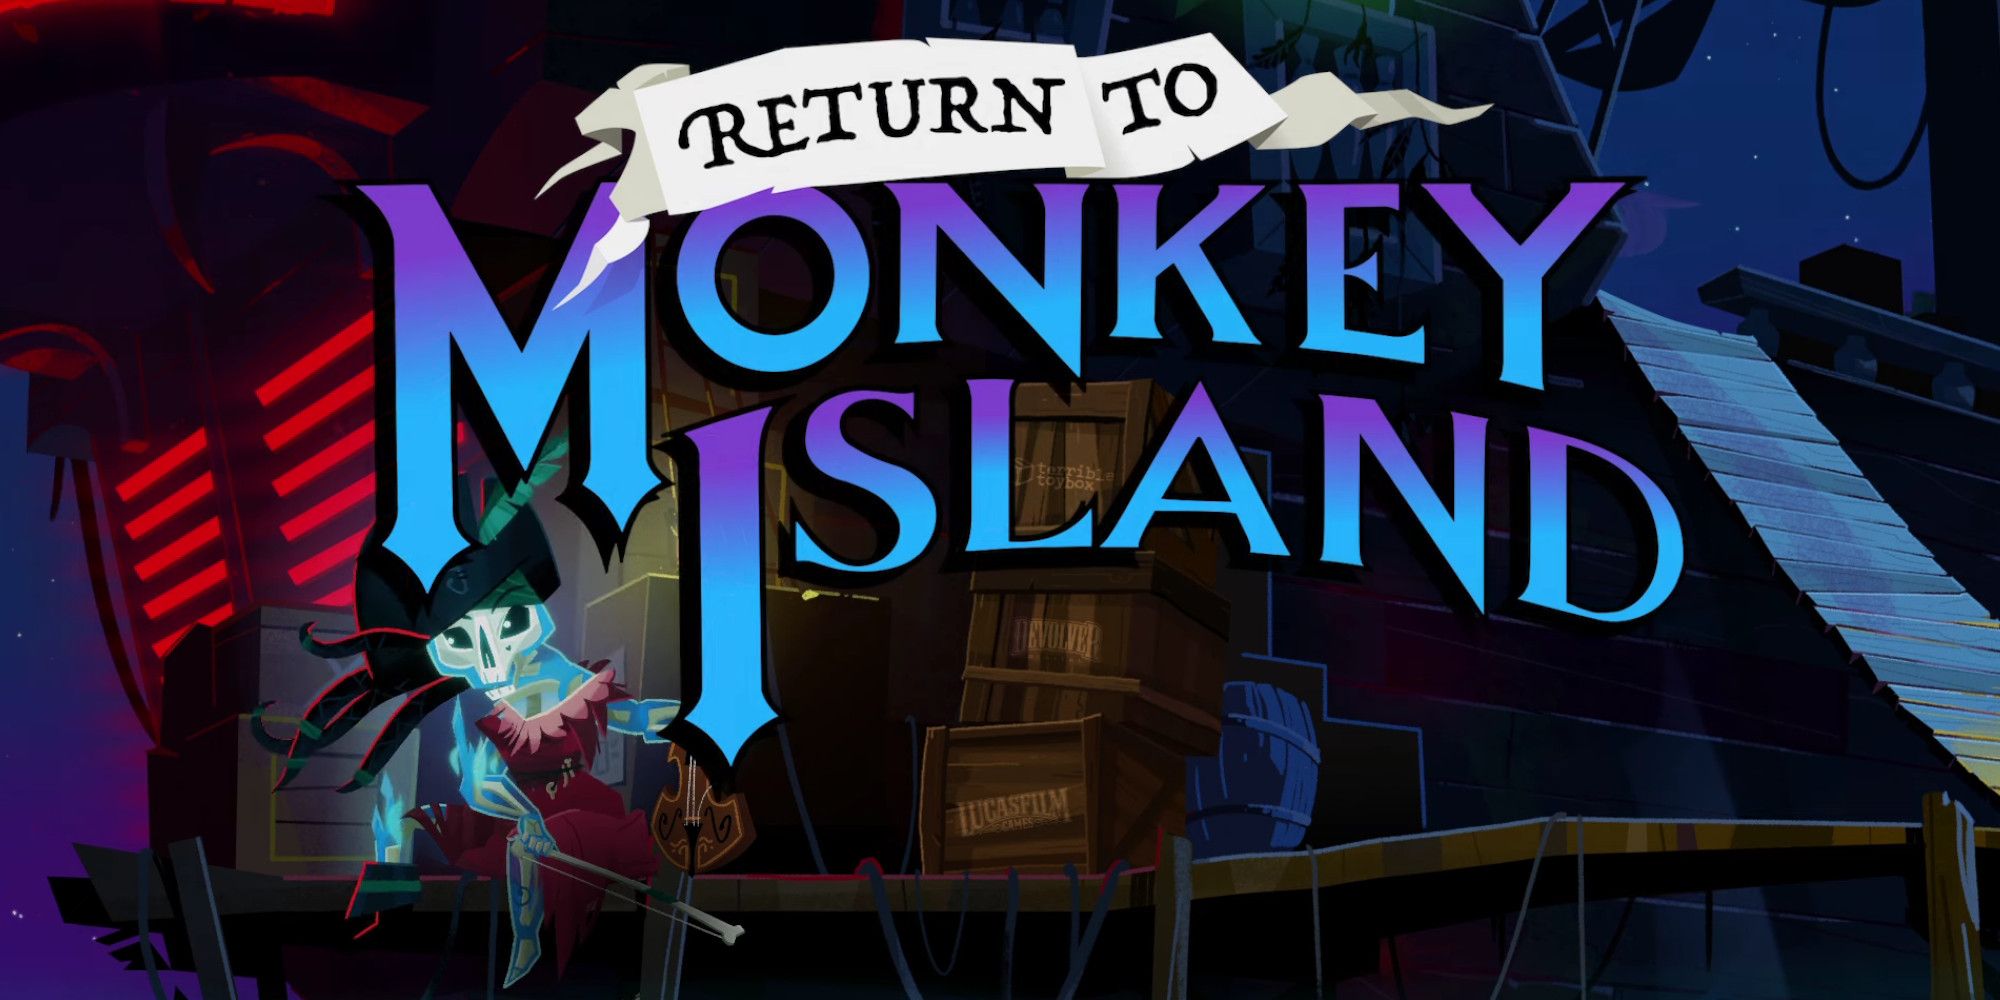 return to monkey island logo with a skeleton playing the fiddle